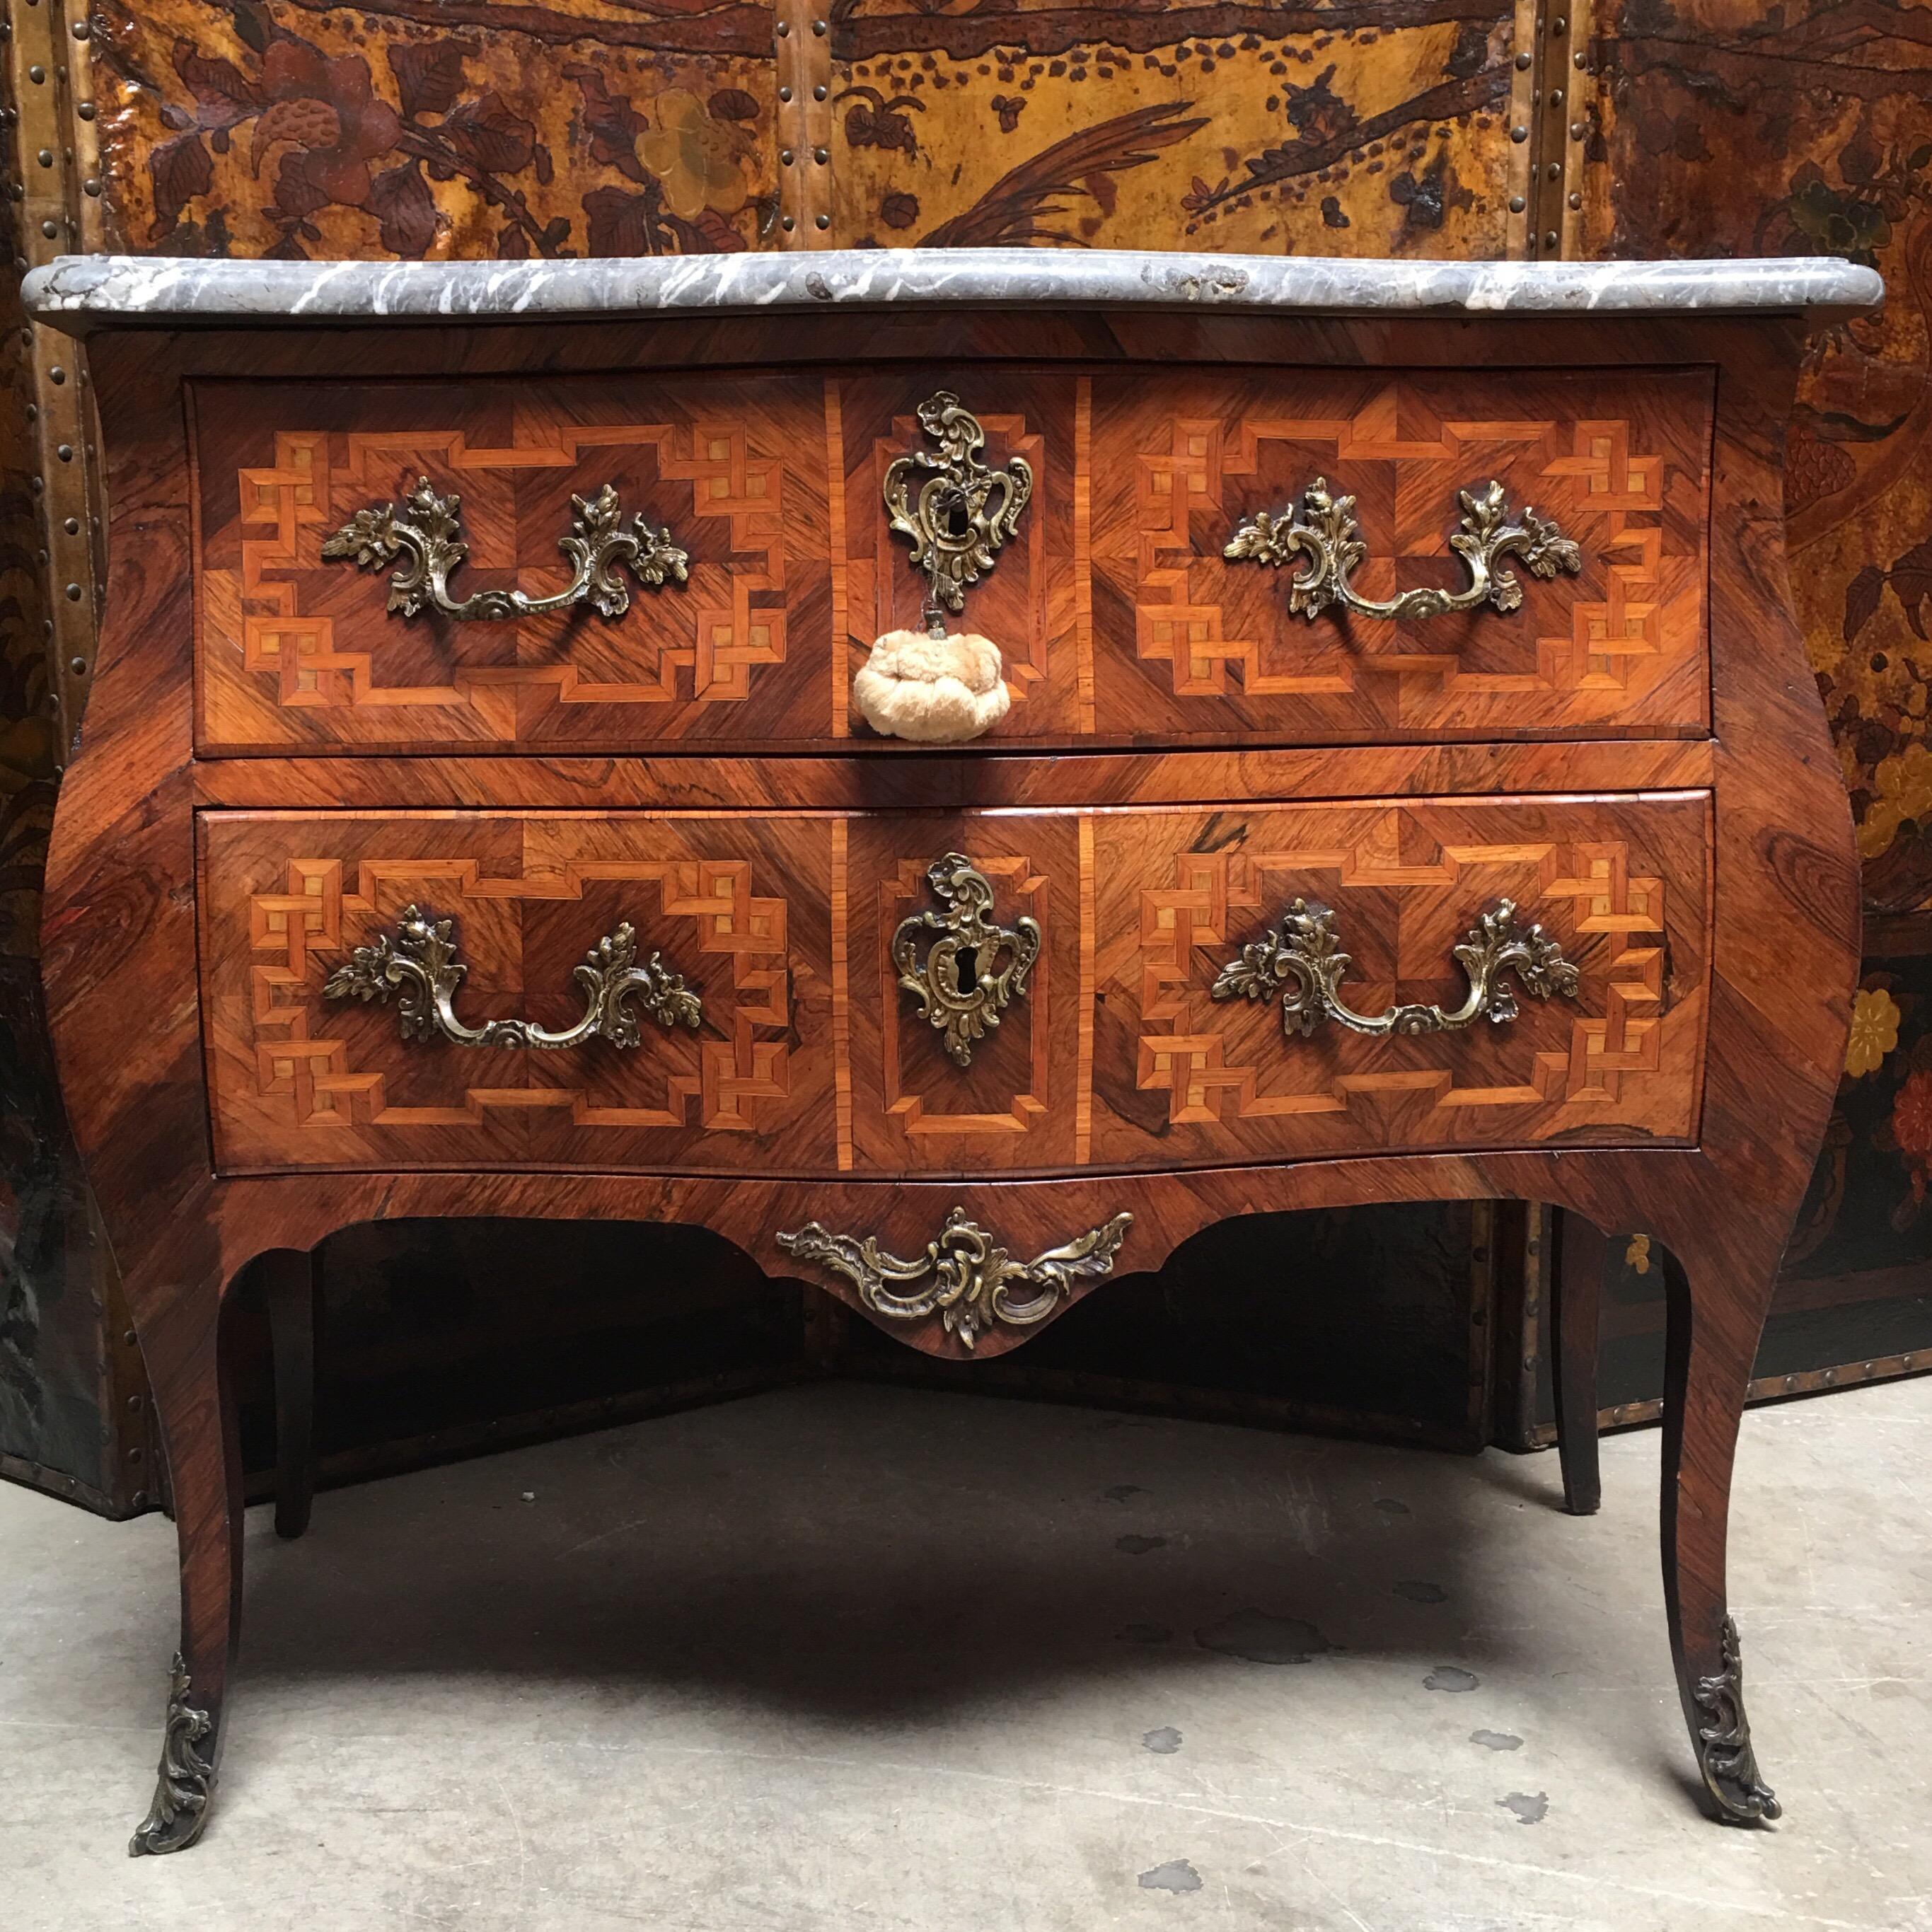 An 18th century small French Louis XV kingwood  marquetry commode with marble top.
The gorgeous commode has a lovely  geometric key design, made from kingwood veneer, around each drawer and sides. The marble top is mottled grey and white with